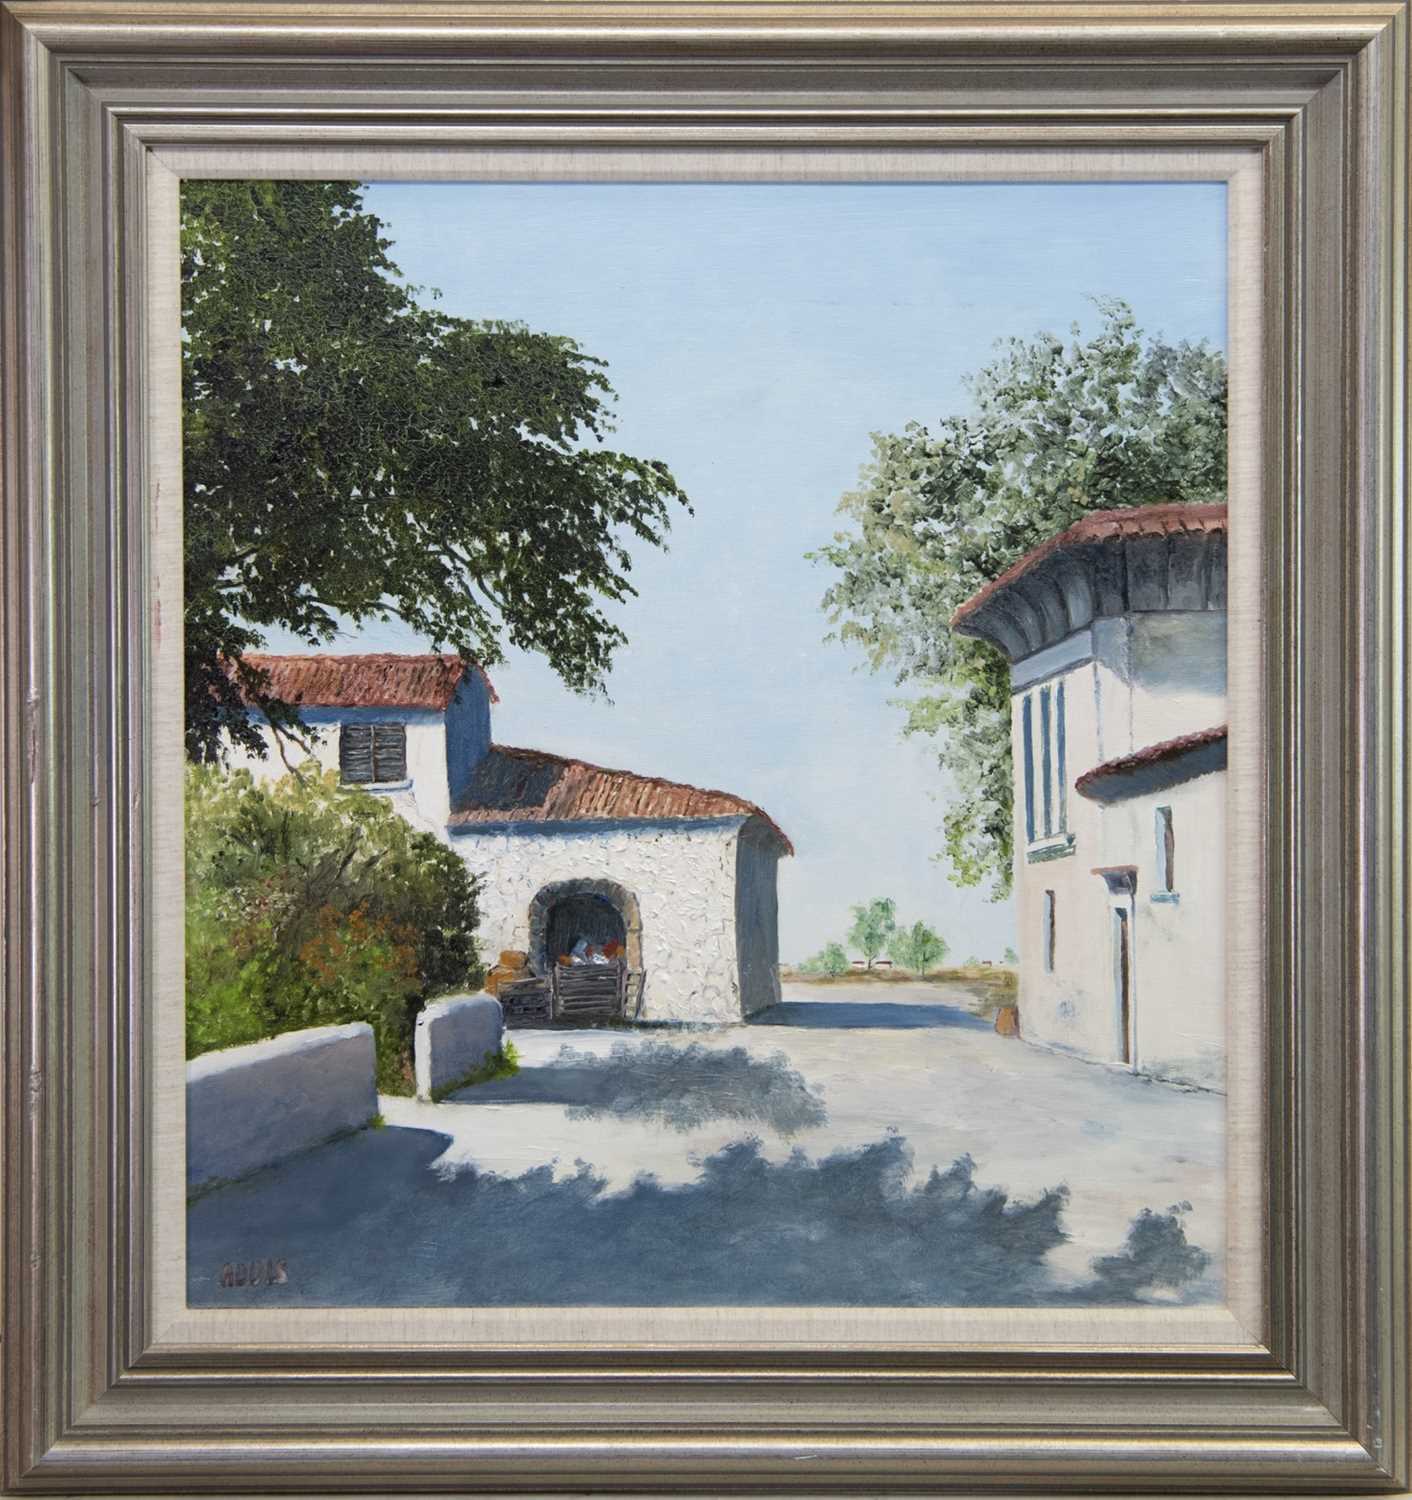 Lot 415 - EMPOLI, NEAR FLORENCE, AN OIL BY MOLLY ADDIS